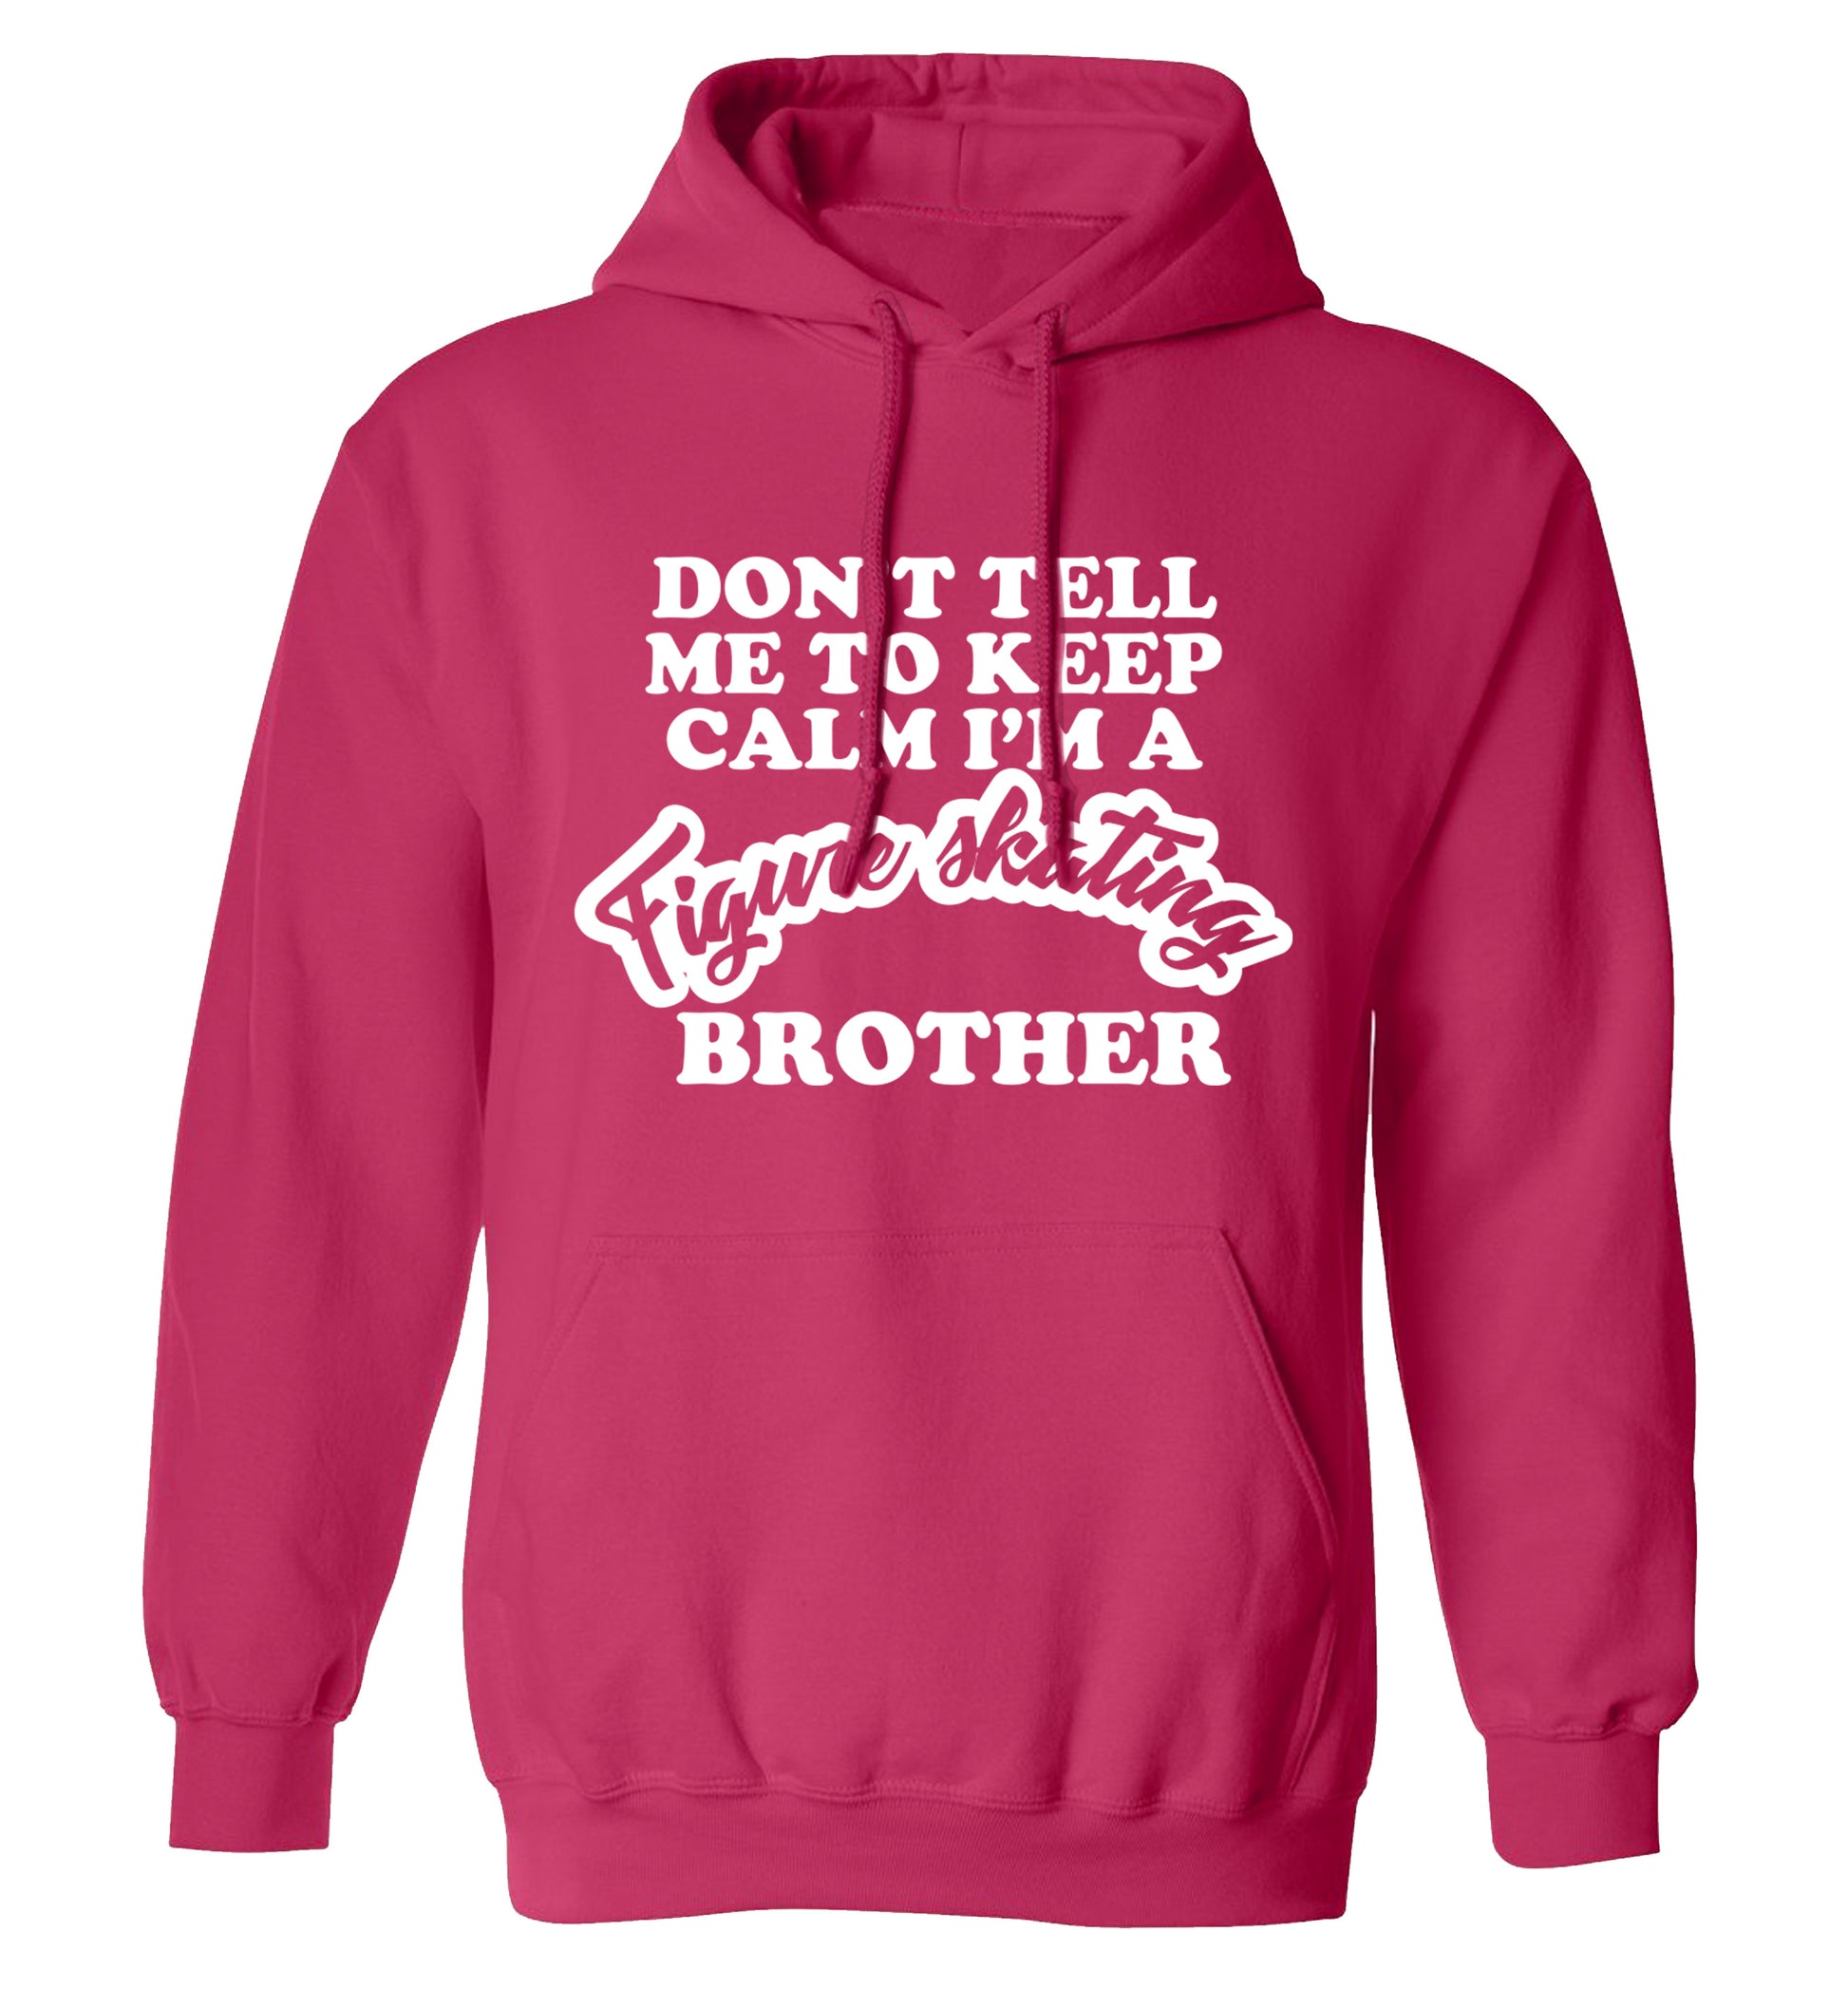 Don't tell me to keep calm I'm a figure skating brother adults unisexpink hoodie 2XL